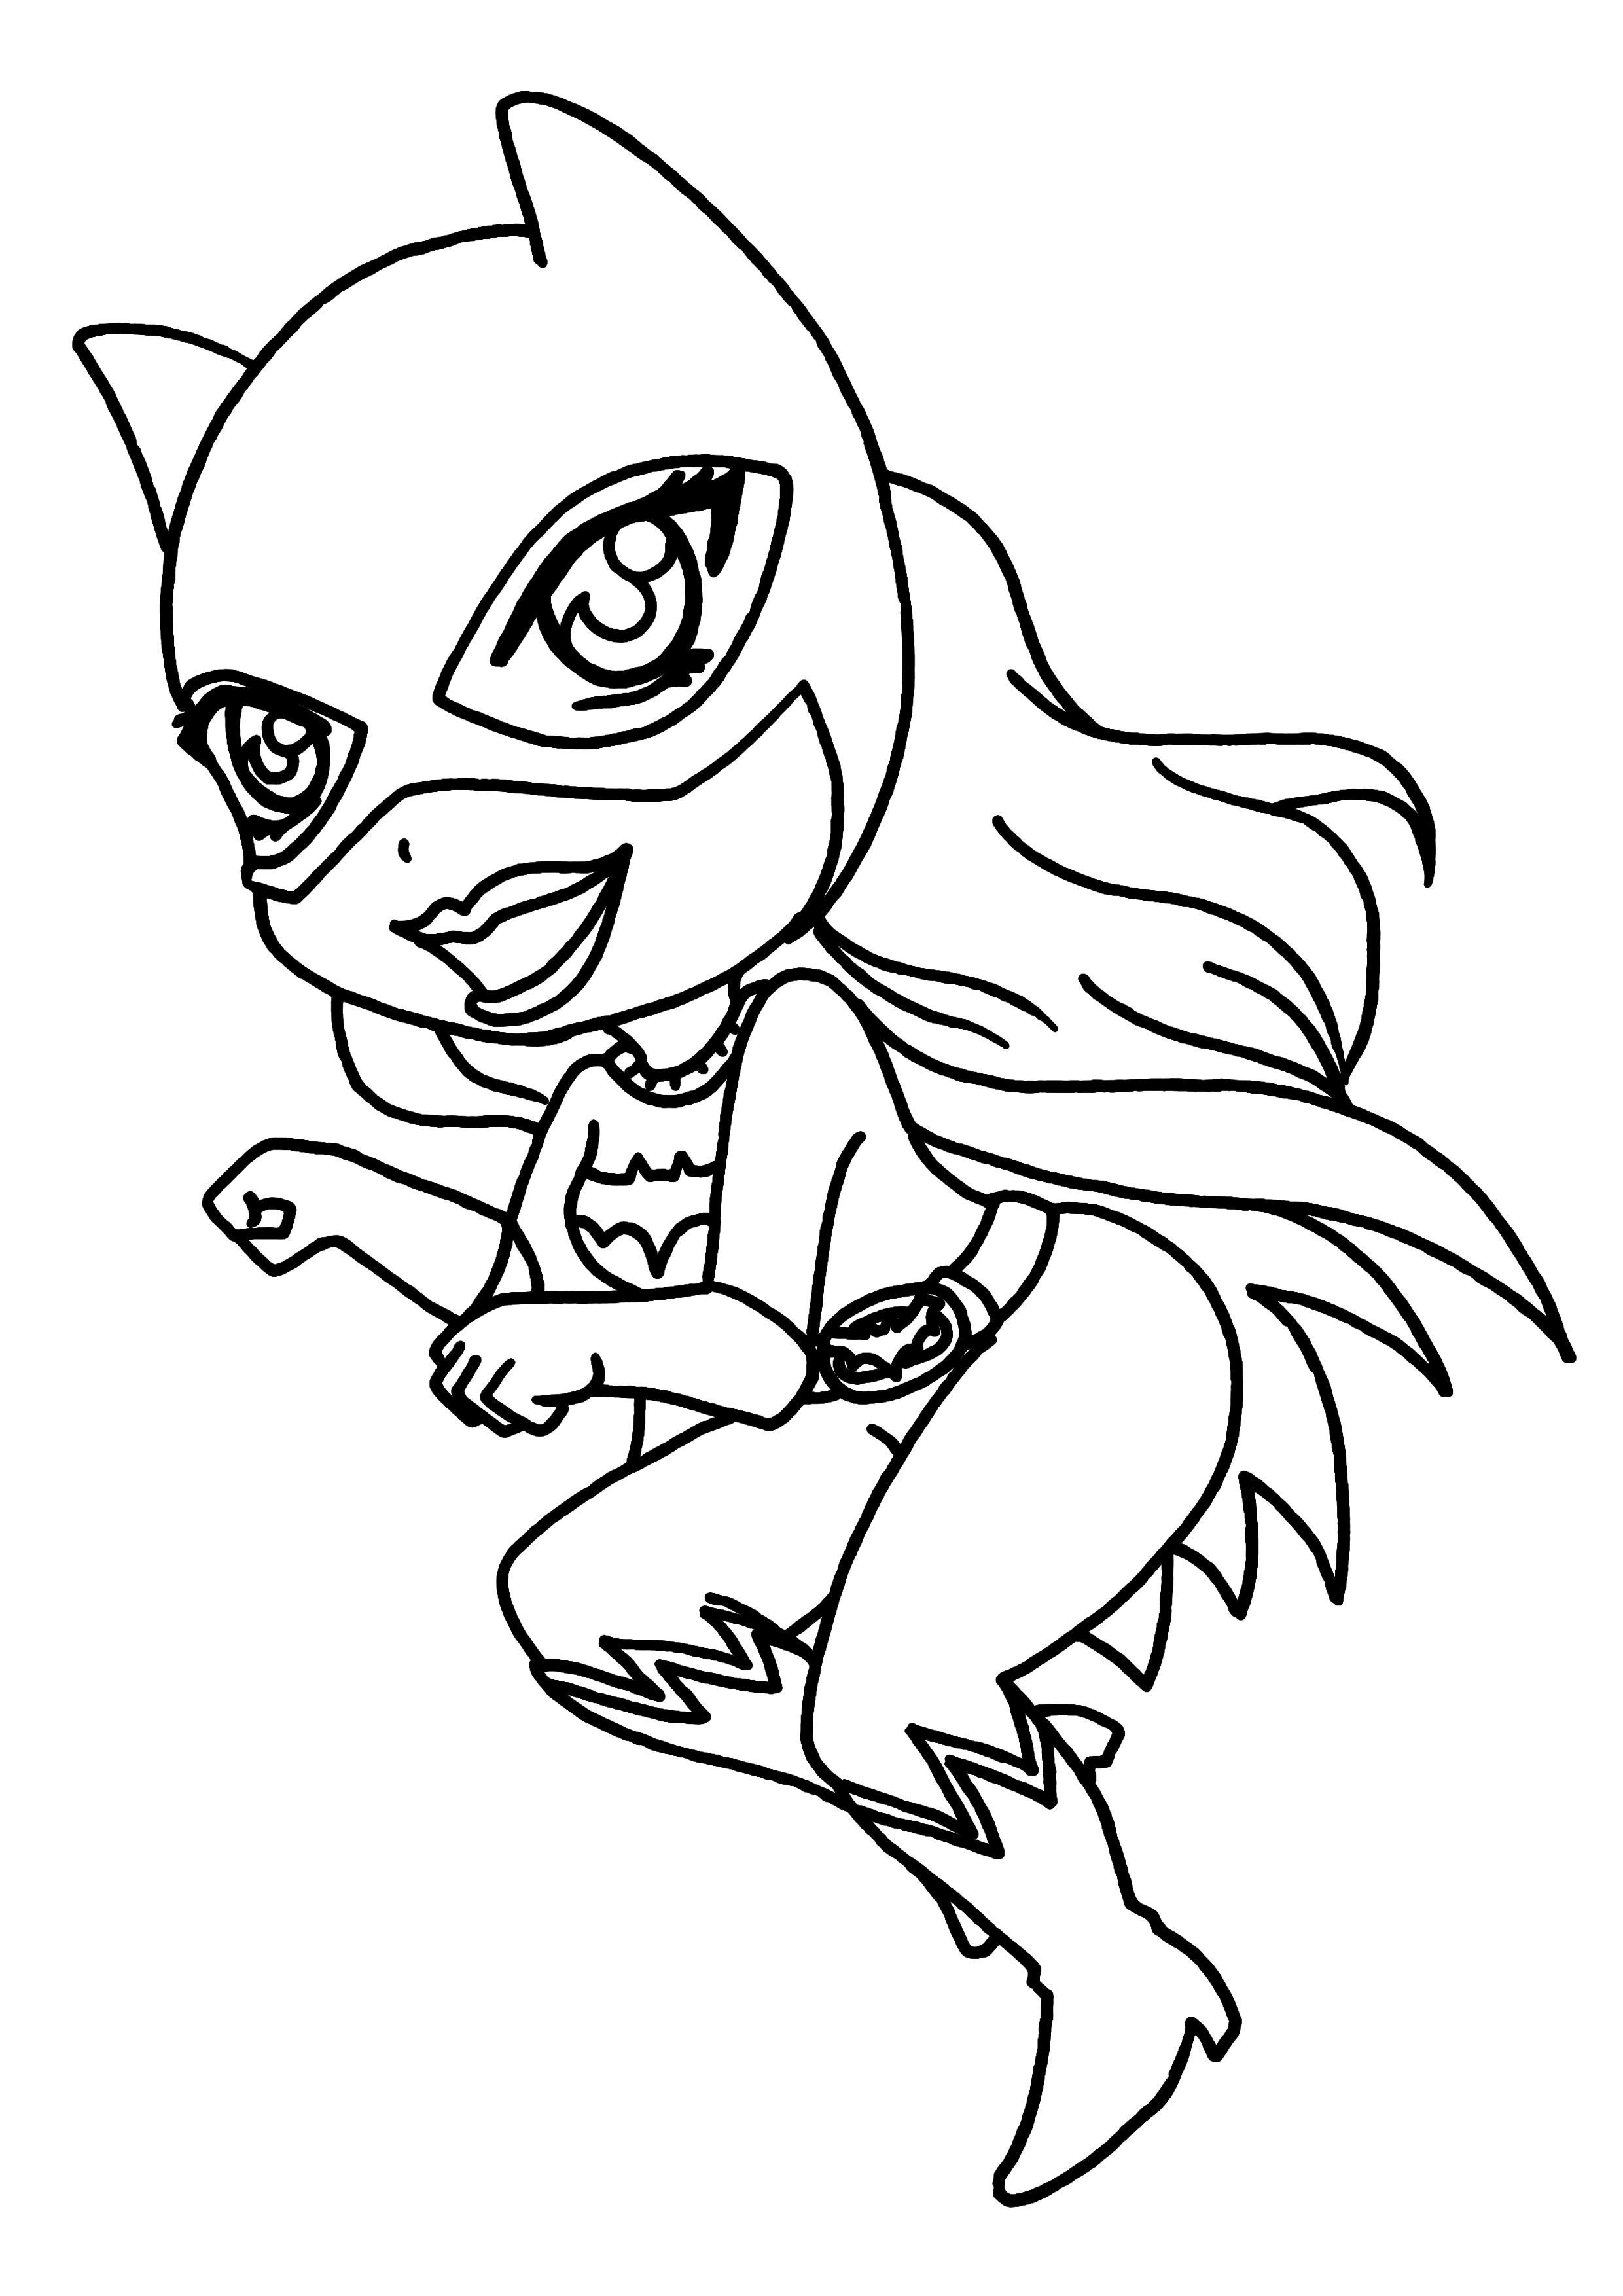 2480x3508 Coloring Pages Nice Catwoman Coloring Pages To Download.